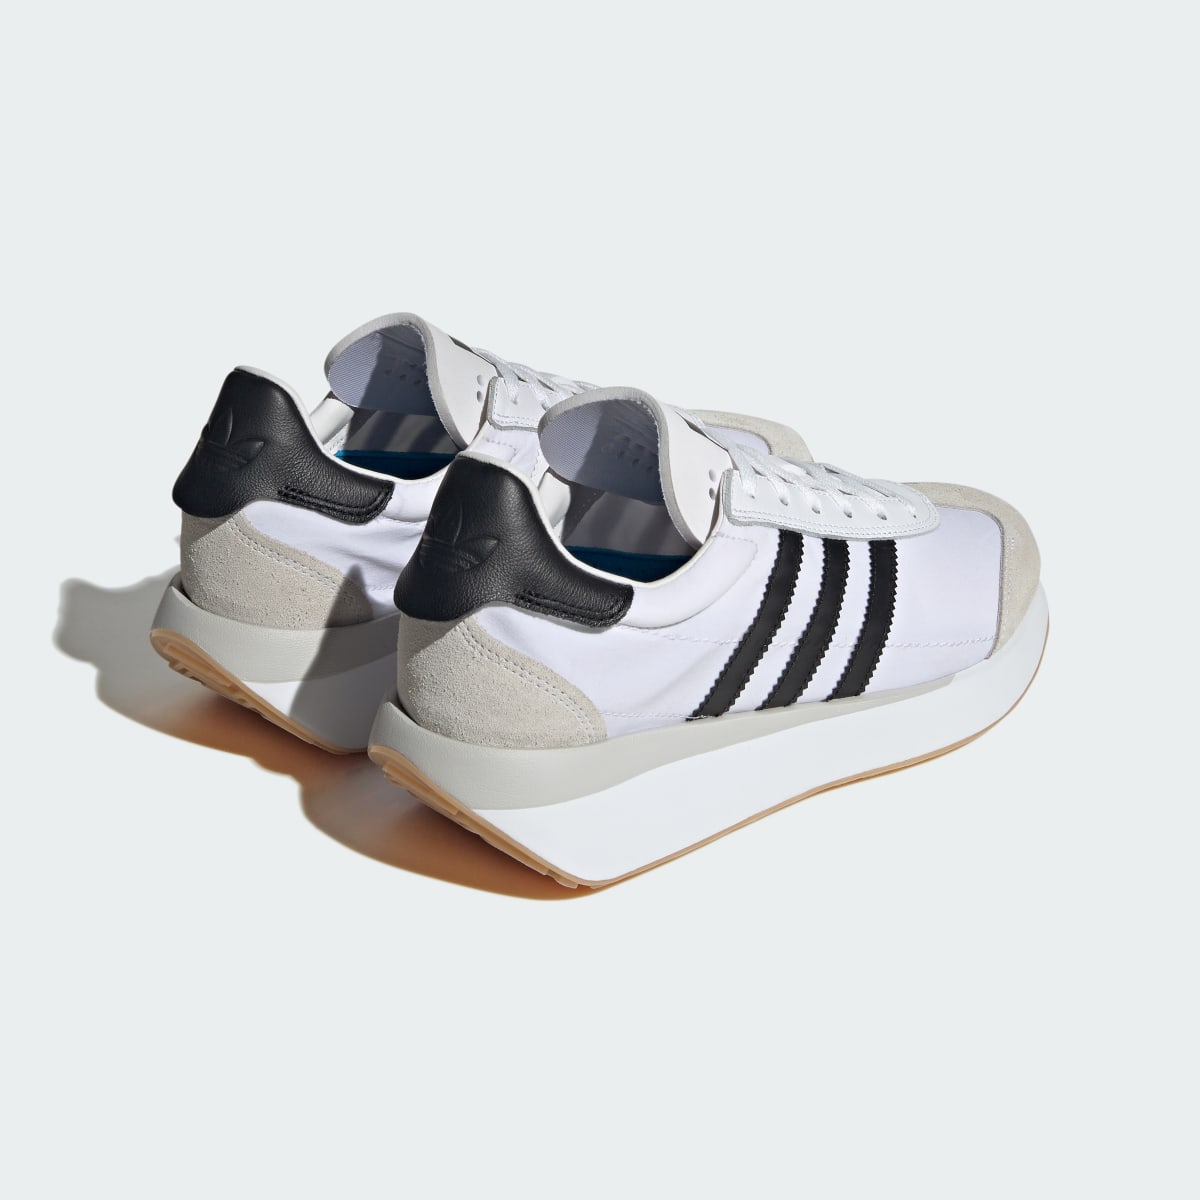 Adidas Country XLG Shoes. 6